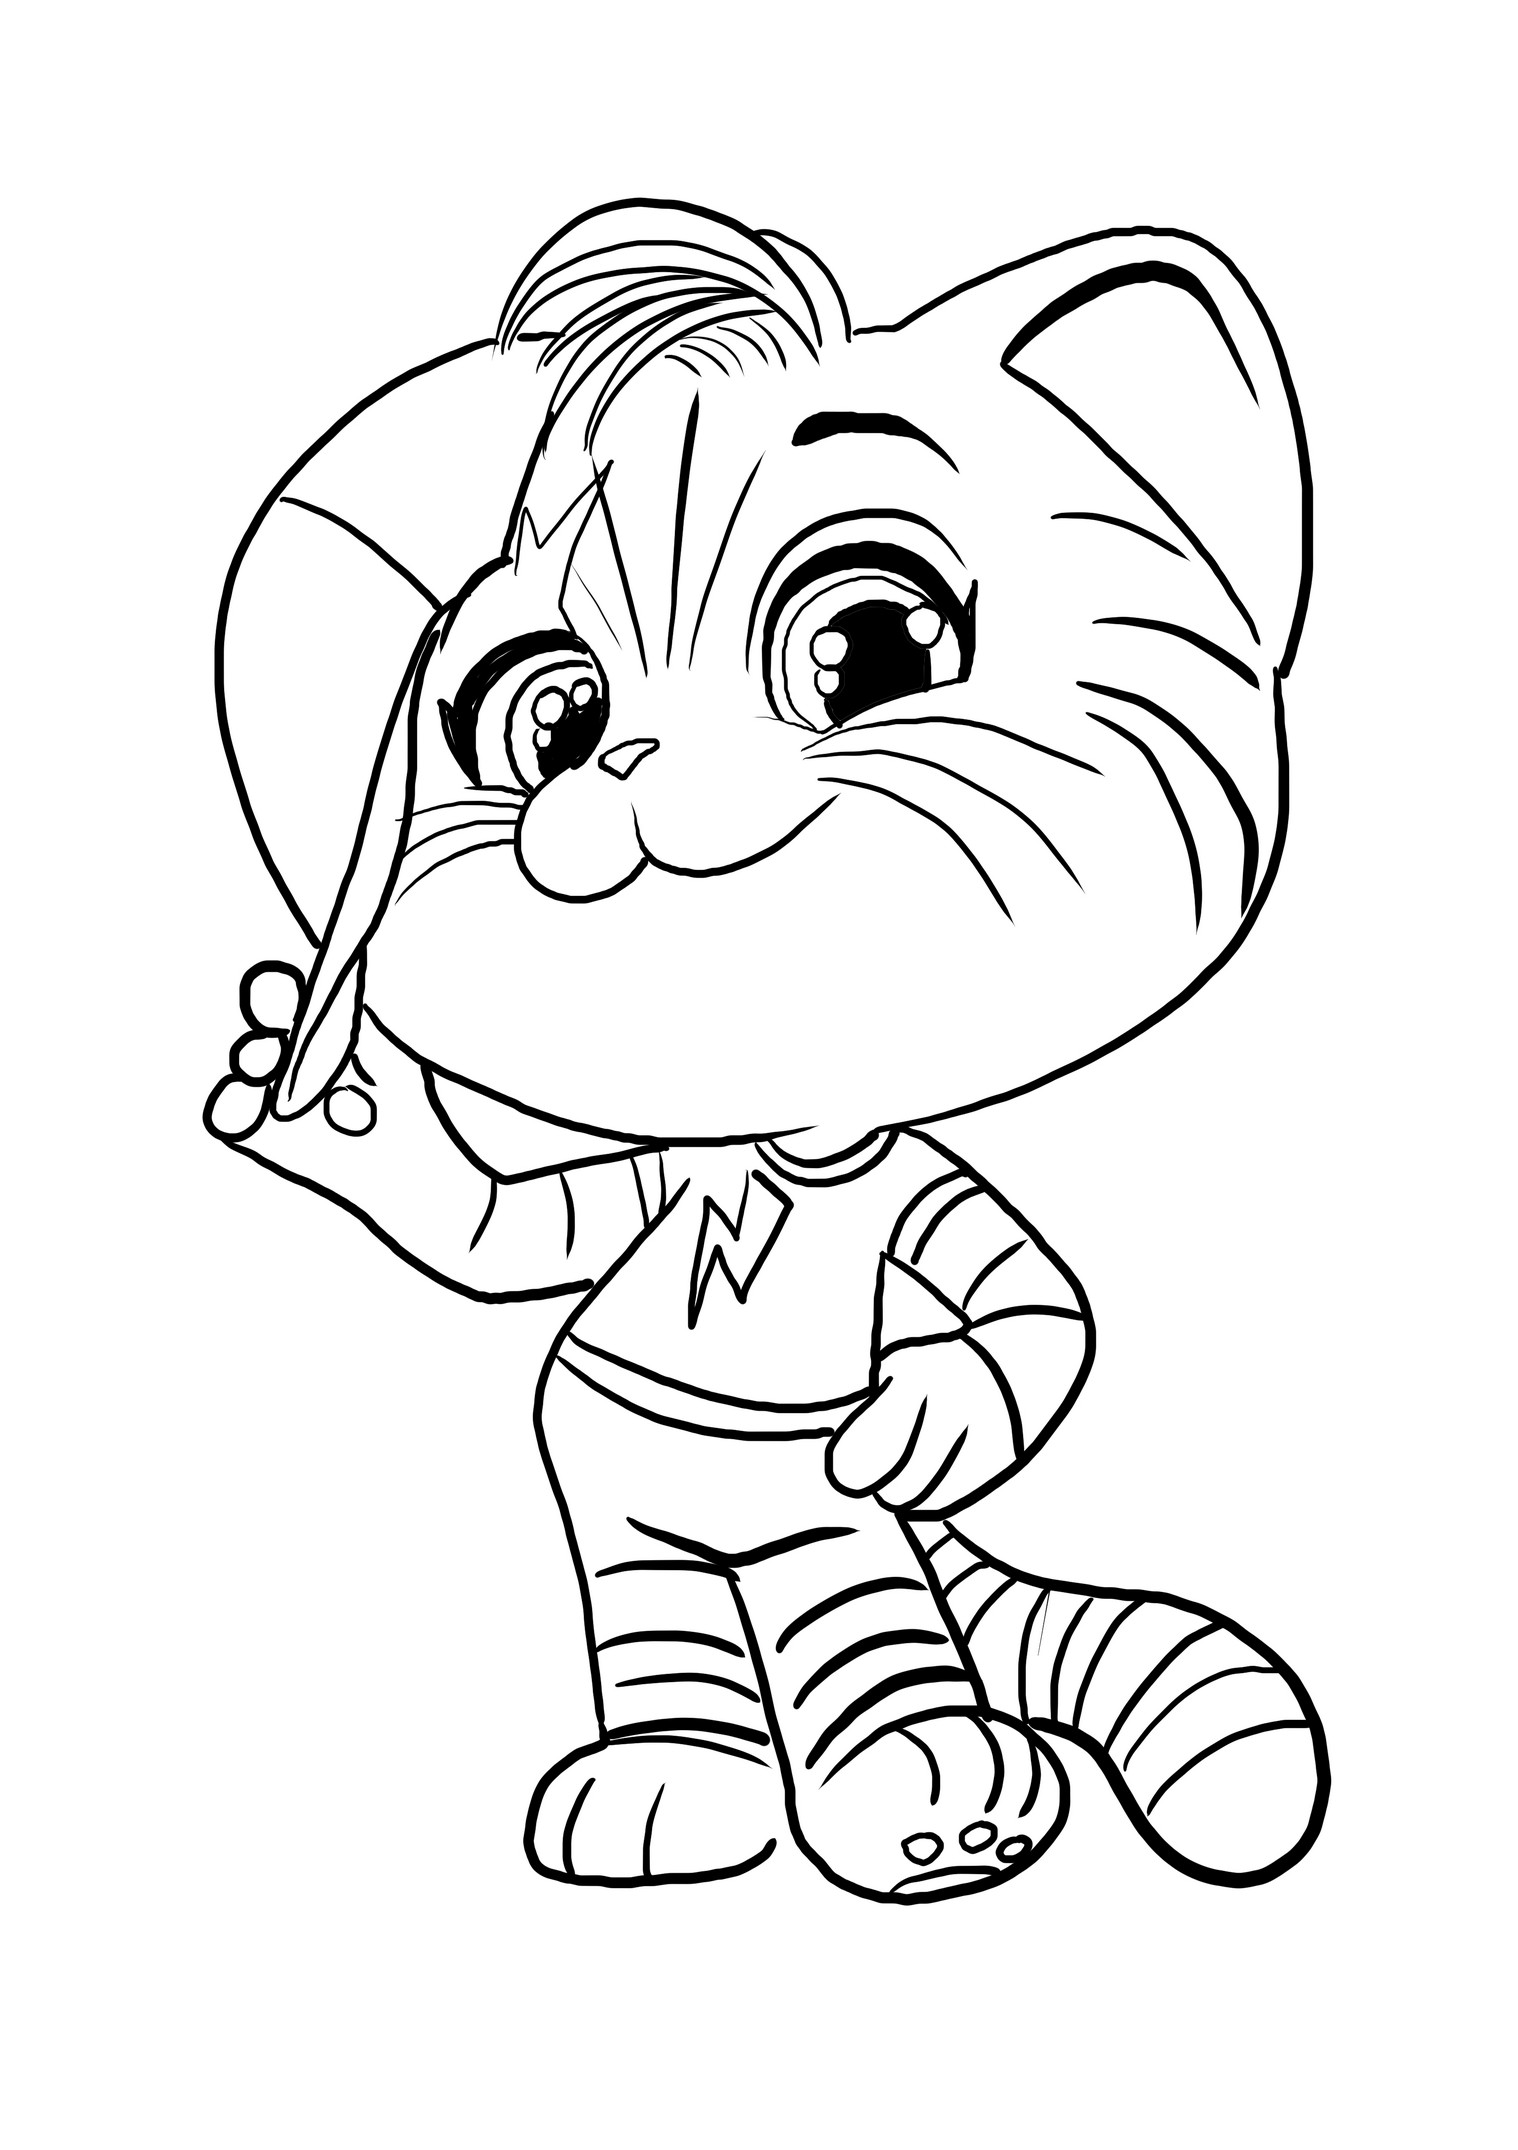 Lightning of 44 cats coloring page